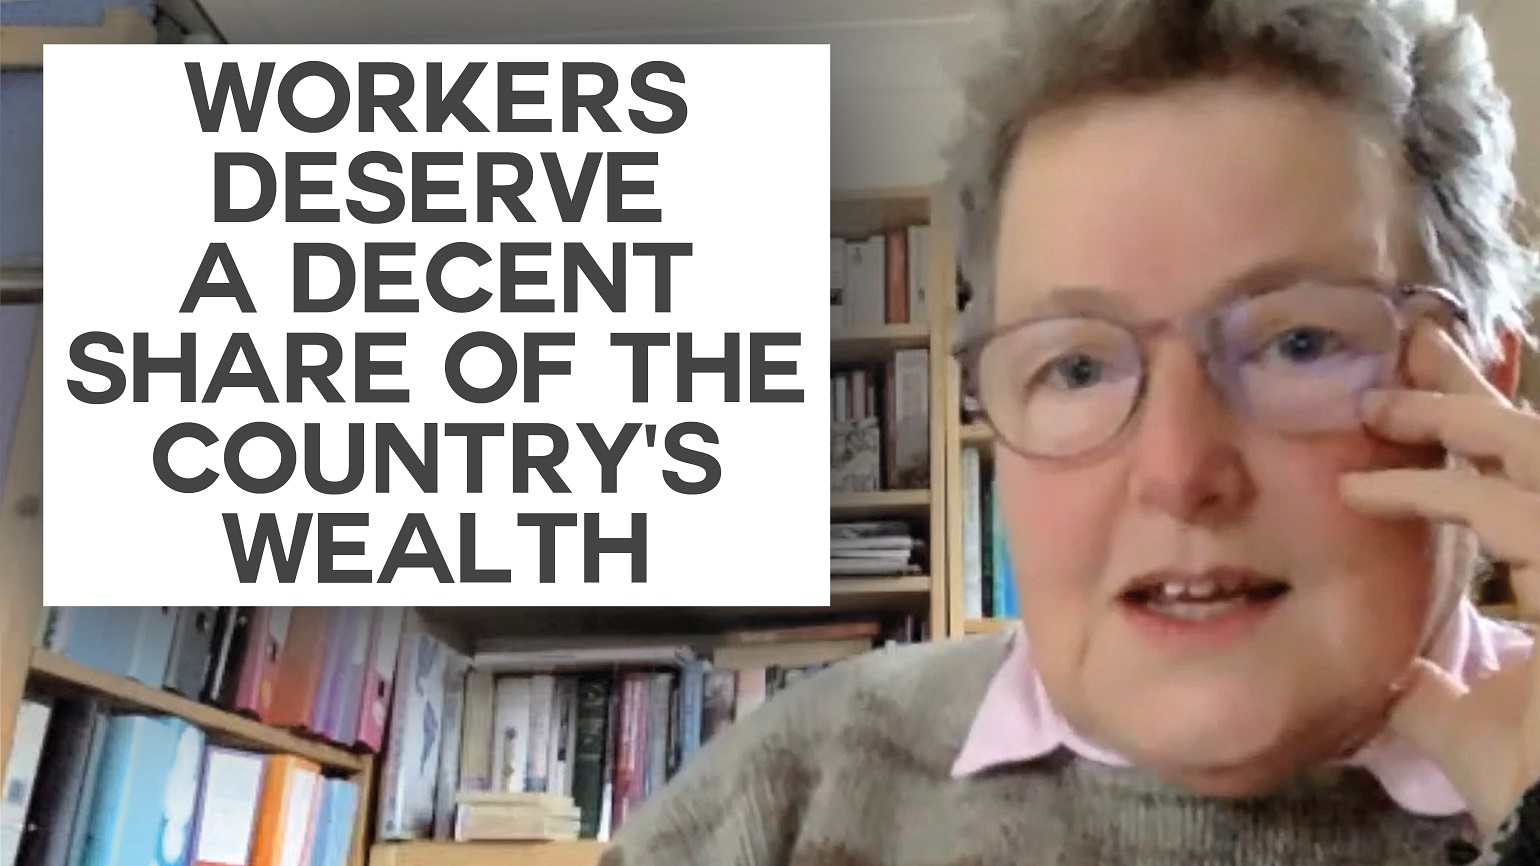 A still of an interview with Catherine Rowett with text reading "Workers deserve a decent share of the country's wealth"